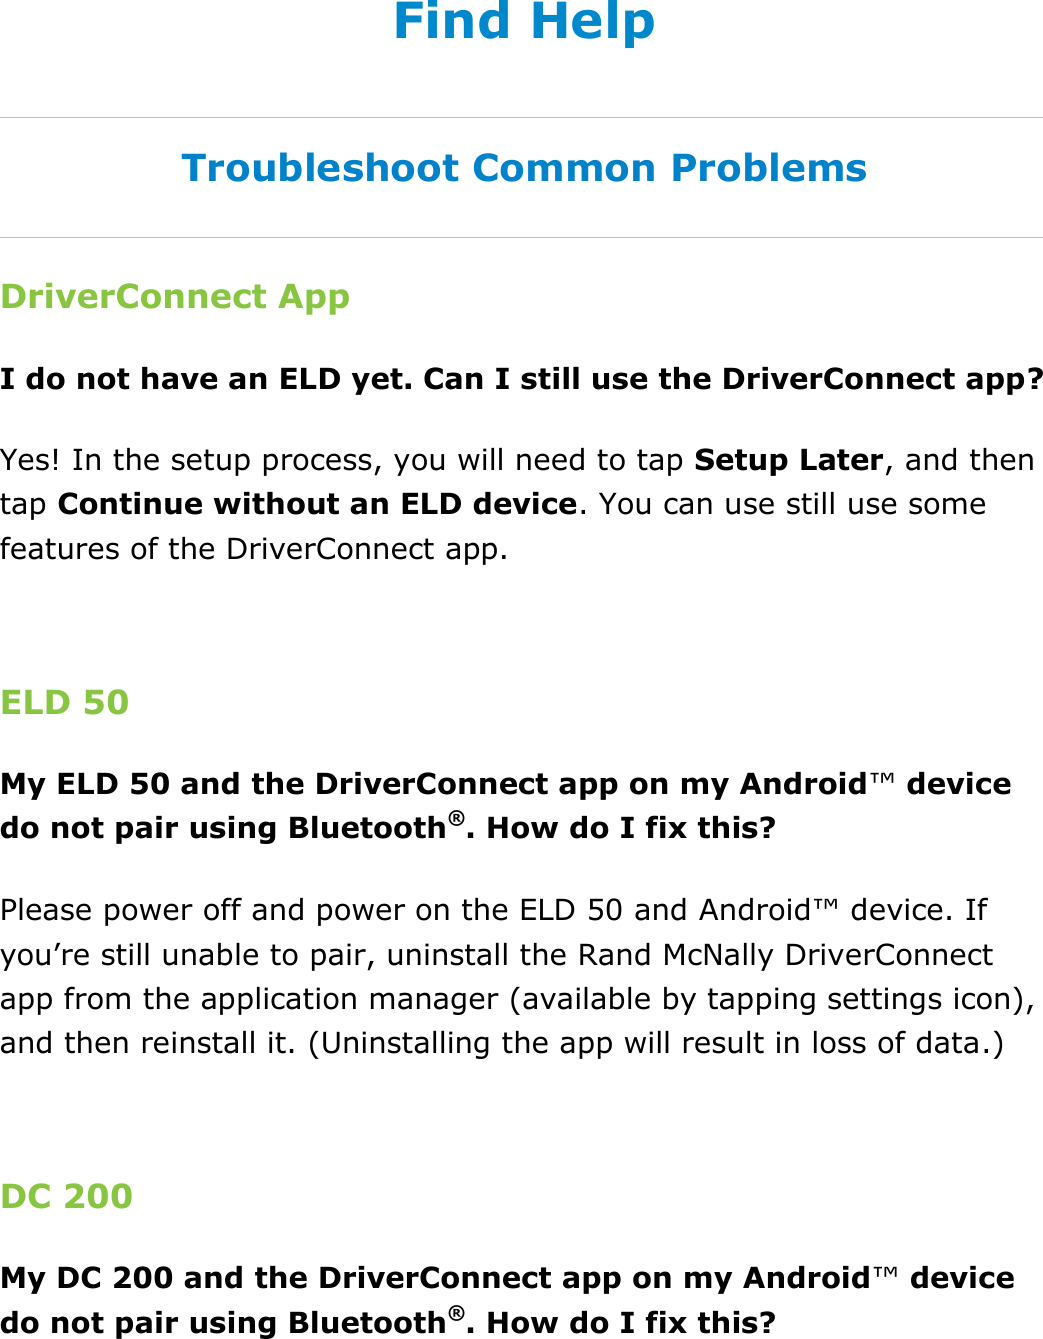 Find Help DriverConnect User Guide  90 © 2016-2017, Rand McNally, Inc. Find Help Troubleshoot Common Problems DriverConnect App I do not have an ELD yet. Can I still use the DriverConnect app? Yes! In the setup process, you will need to tap Setup Later, and then tap Continue without an ELD device. You can use still use some features of the DriverConnect app.  ELD 50 My ELD 50 and the DriverConnect app on my Android™ device do not pair using Bluetooth®. How do I fix this? Please power off and power on the ELD 50 and Android™ device. If you’re still unable to pair, uninstall the Rand McNally DriverConnect app from the application manager (available by tapping settings icon), and then reinstall it. (Uninstalling the app will result in loss of data.)  DC 200 My DC 200 and the DriverConnect app on my Android™ device do not pair using Bluetooth®. How do I fix this? 